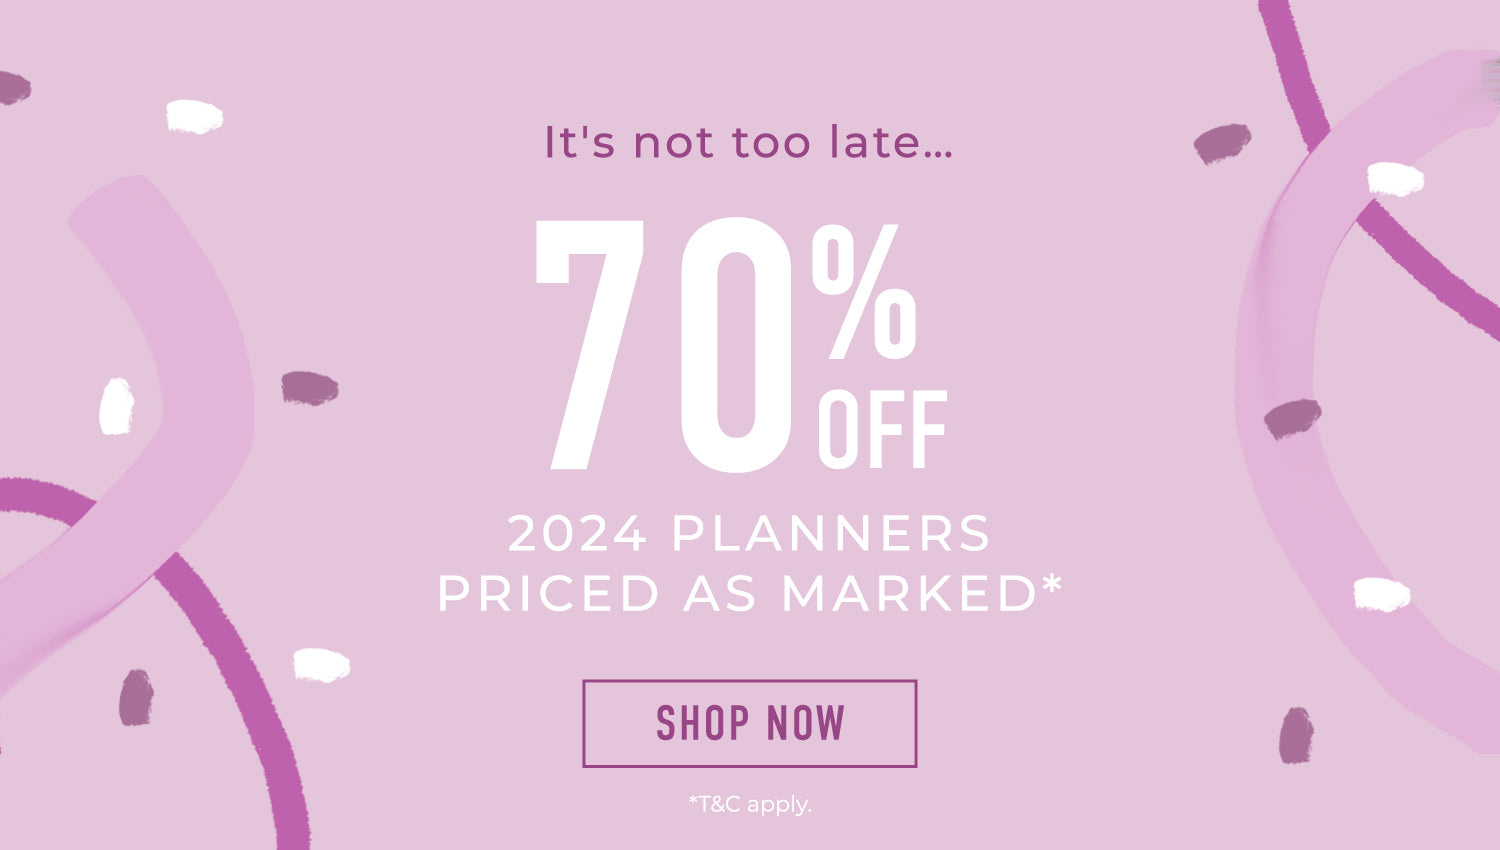 70% Off 2024 Planners - Prices as marked.